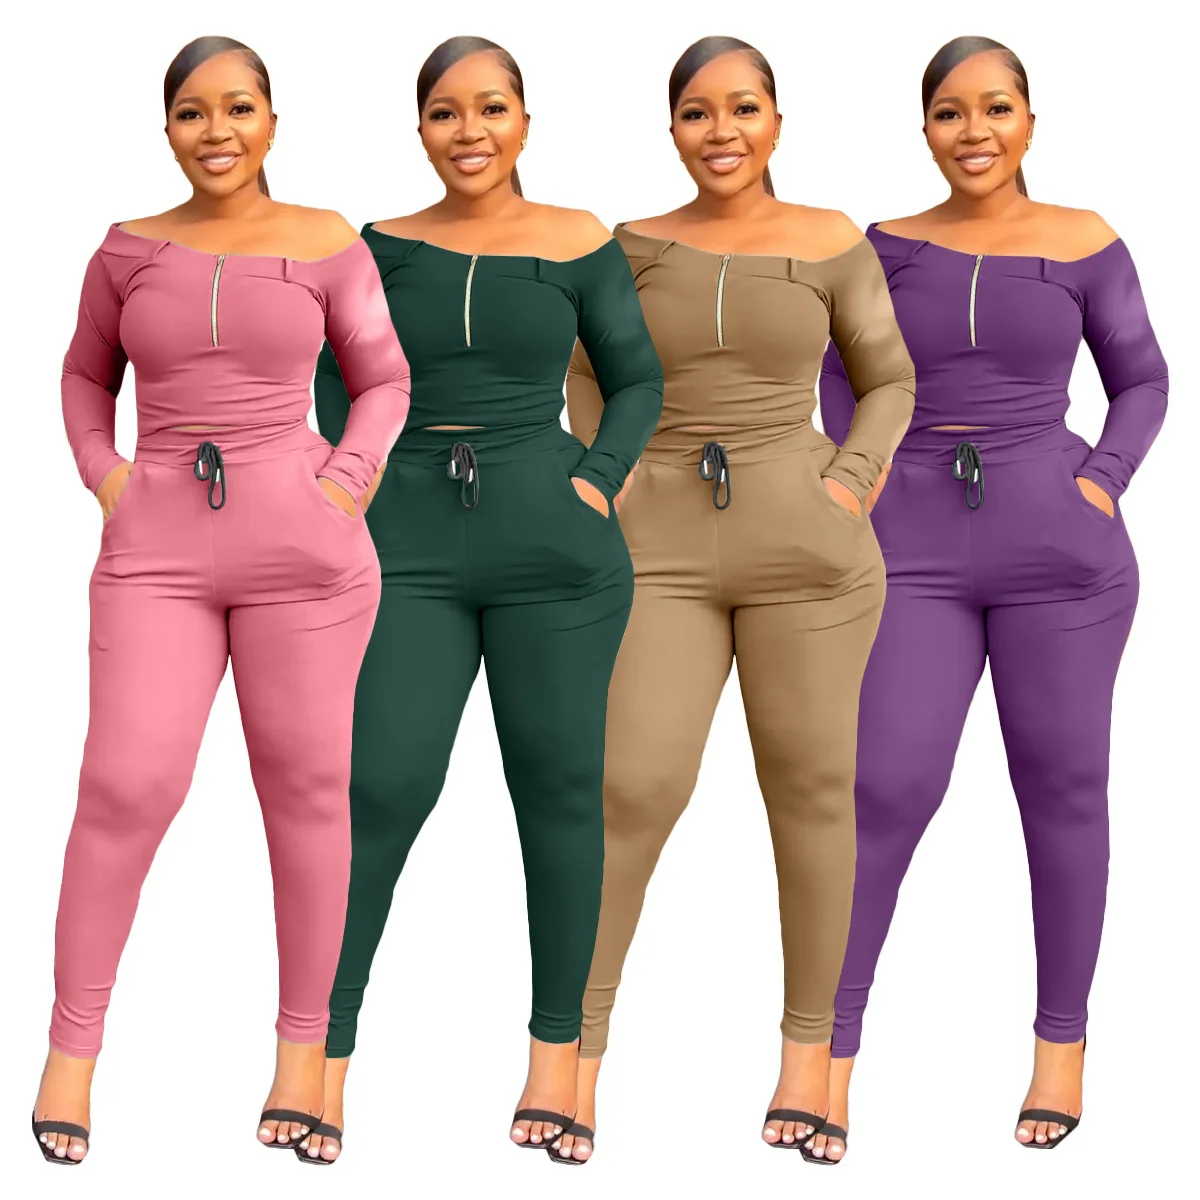 Women's Fall Solid Color Zip-Up Long Sleeve Pants Casual Sports Suit Long Sleeve Crop Top Leggings Fitness Set women yoga t shirt o neck short sleeve tops split hem hollow out breathable elastic solid loose running fitness gym sportswear